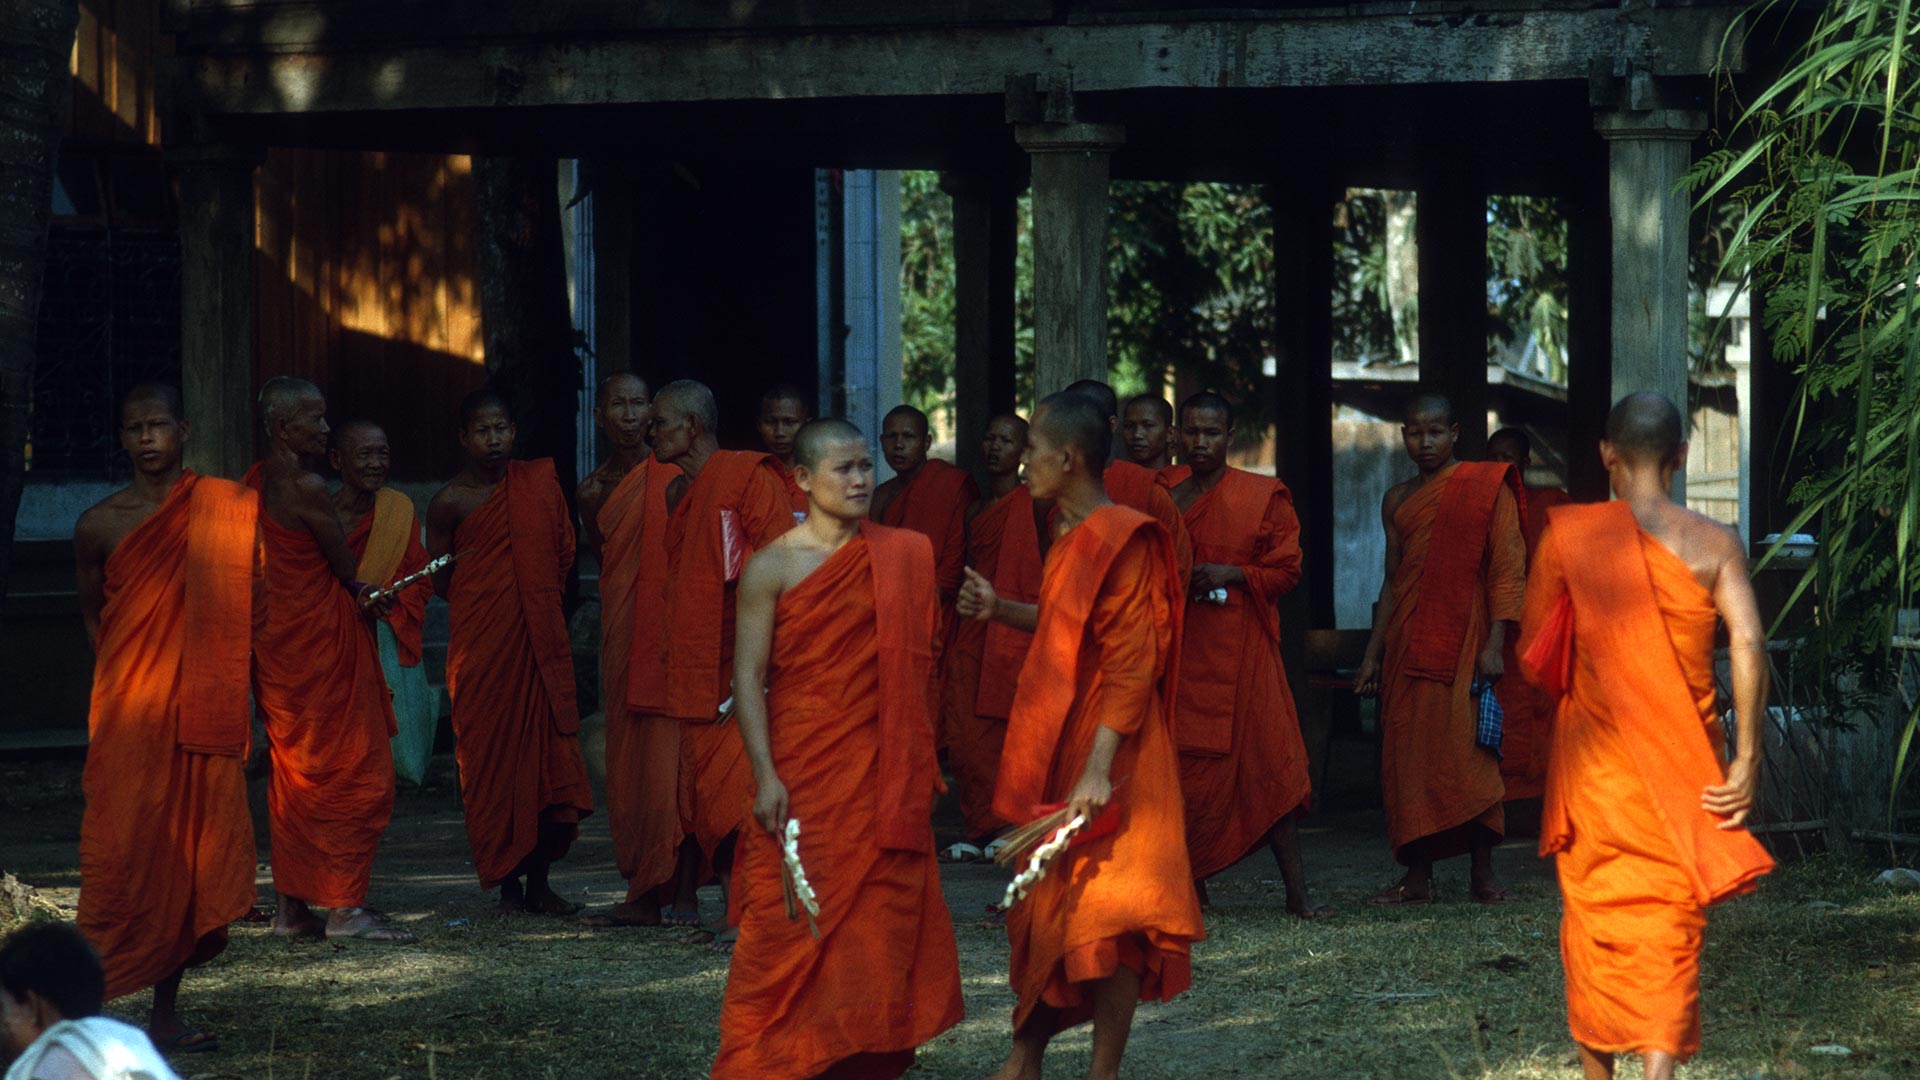 group of monks dressed in orange robes standing outside